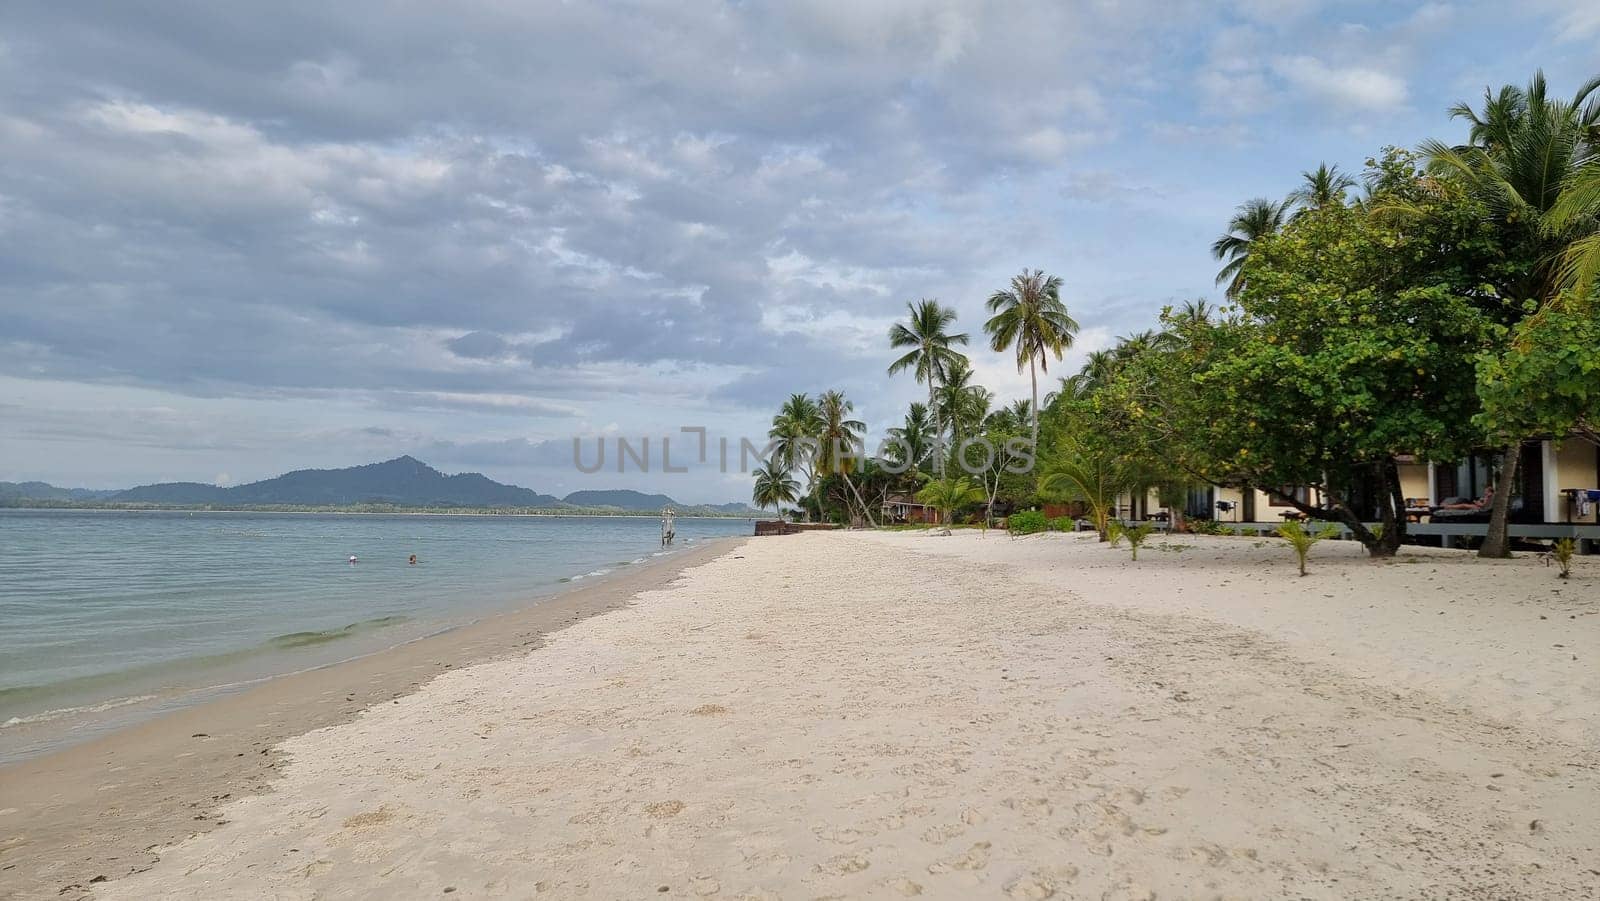 A tranquil sandy beach lined with swaying palm trees and picturesque houses along the shore, creating a peaceful and idyllic coastal scene by fokkebok